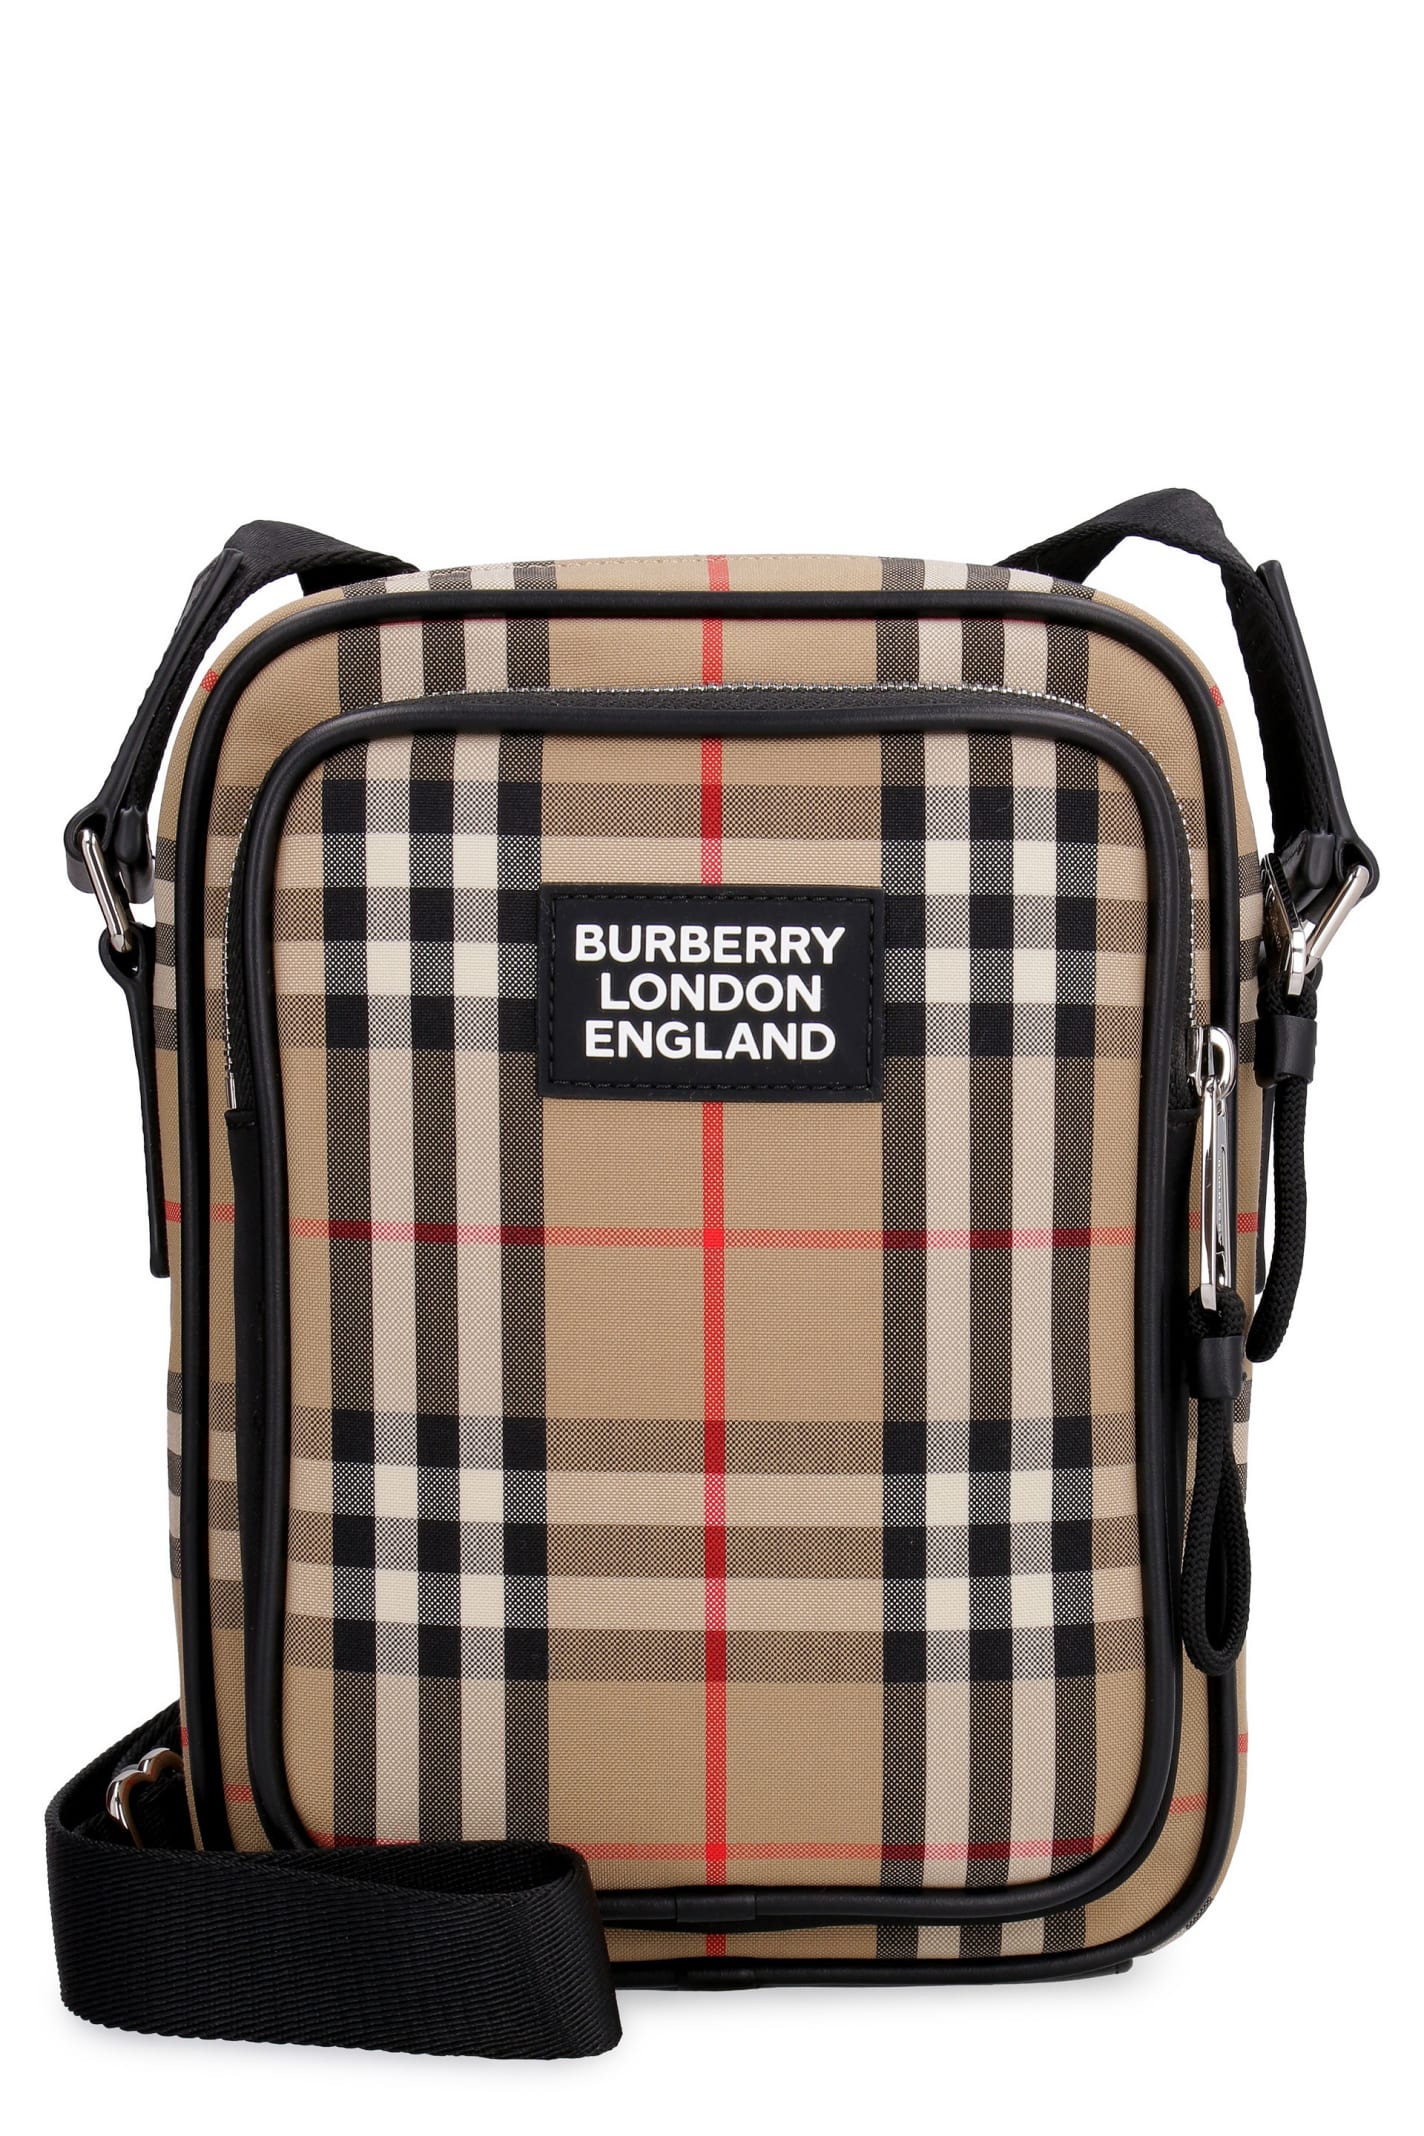 Burberry Messenger Bag With Check Motif In Beige